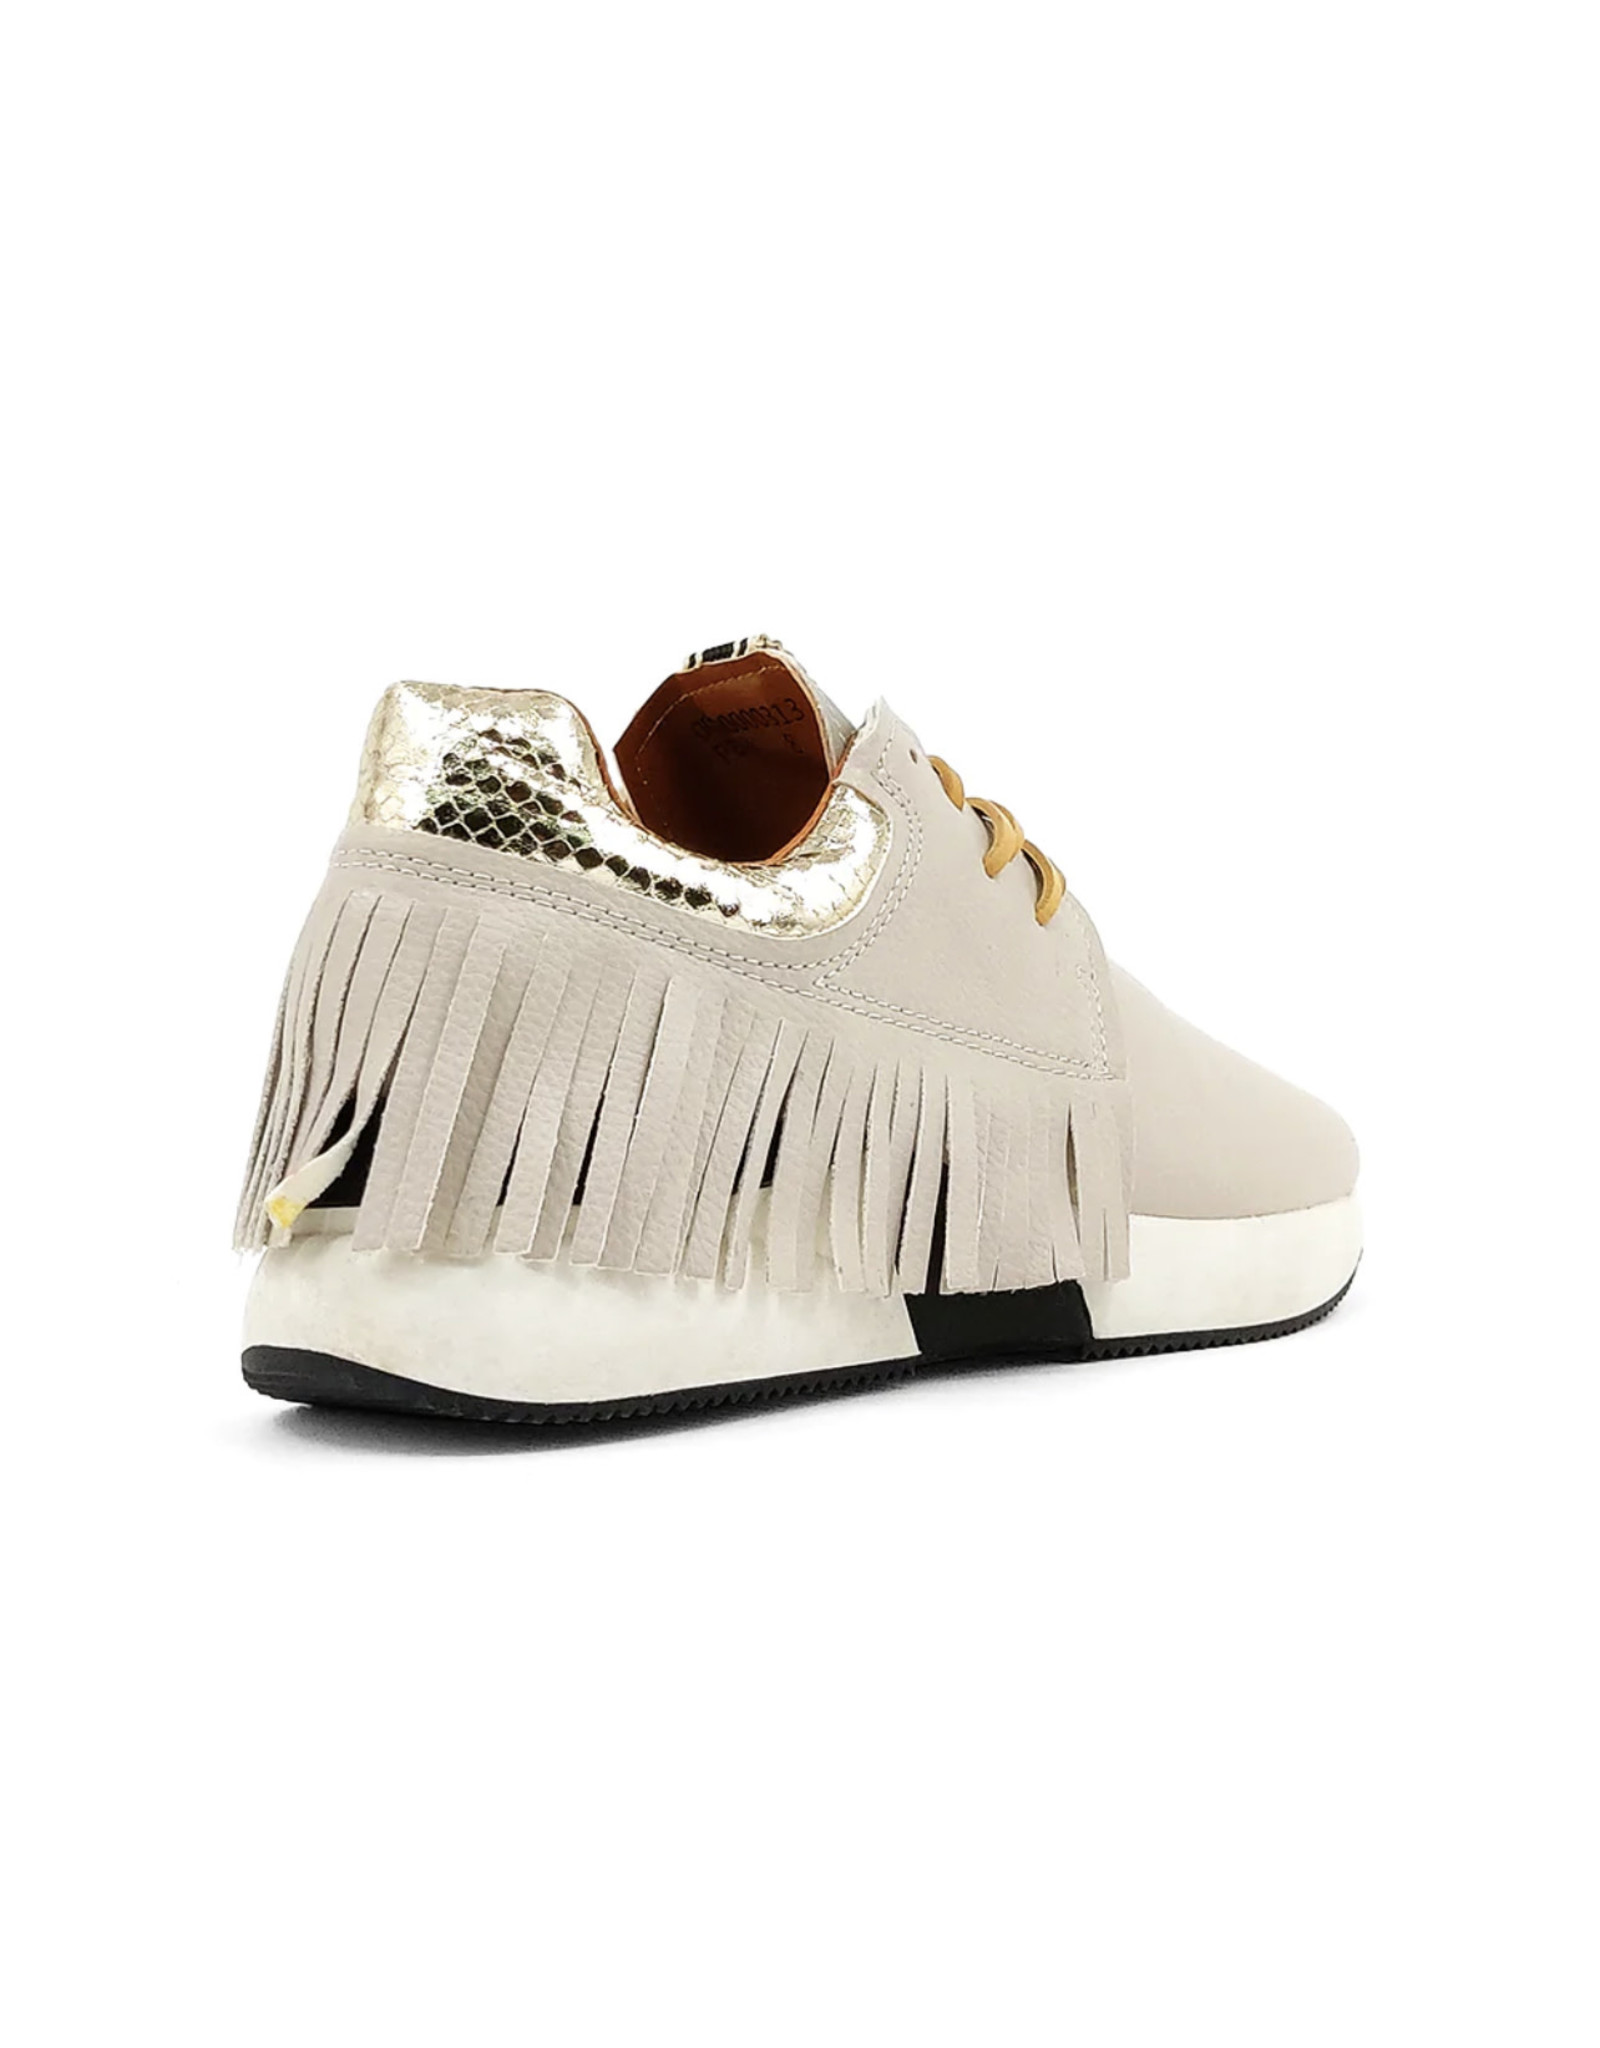 MOCCASIN INSPIRED SNEAKERS